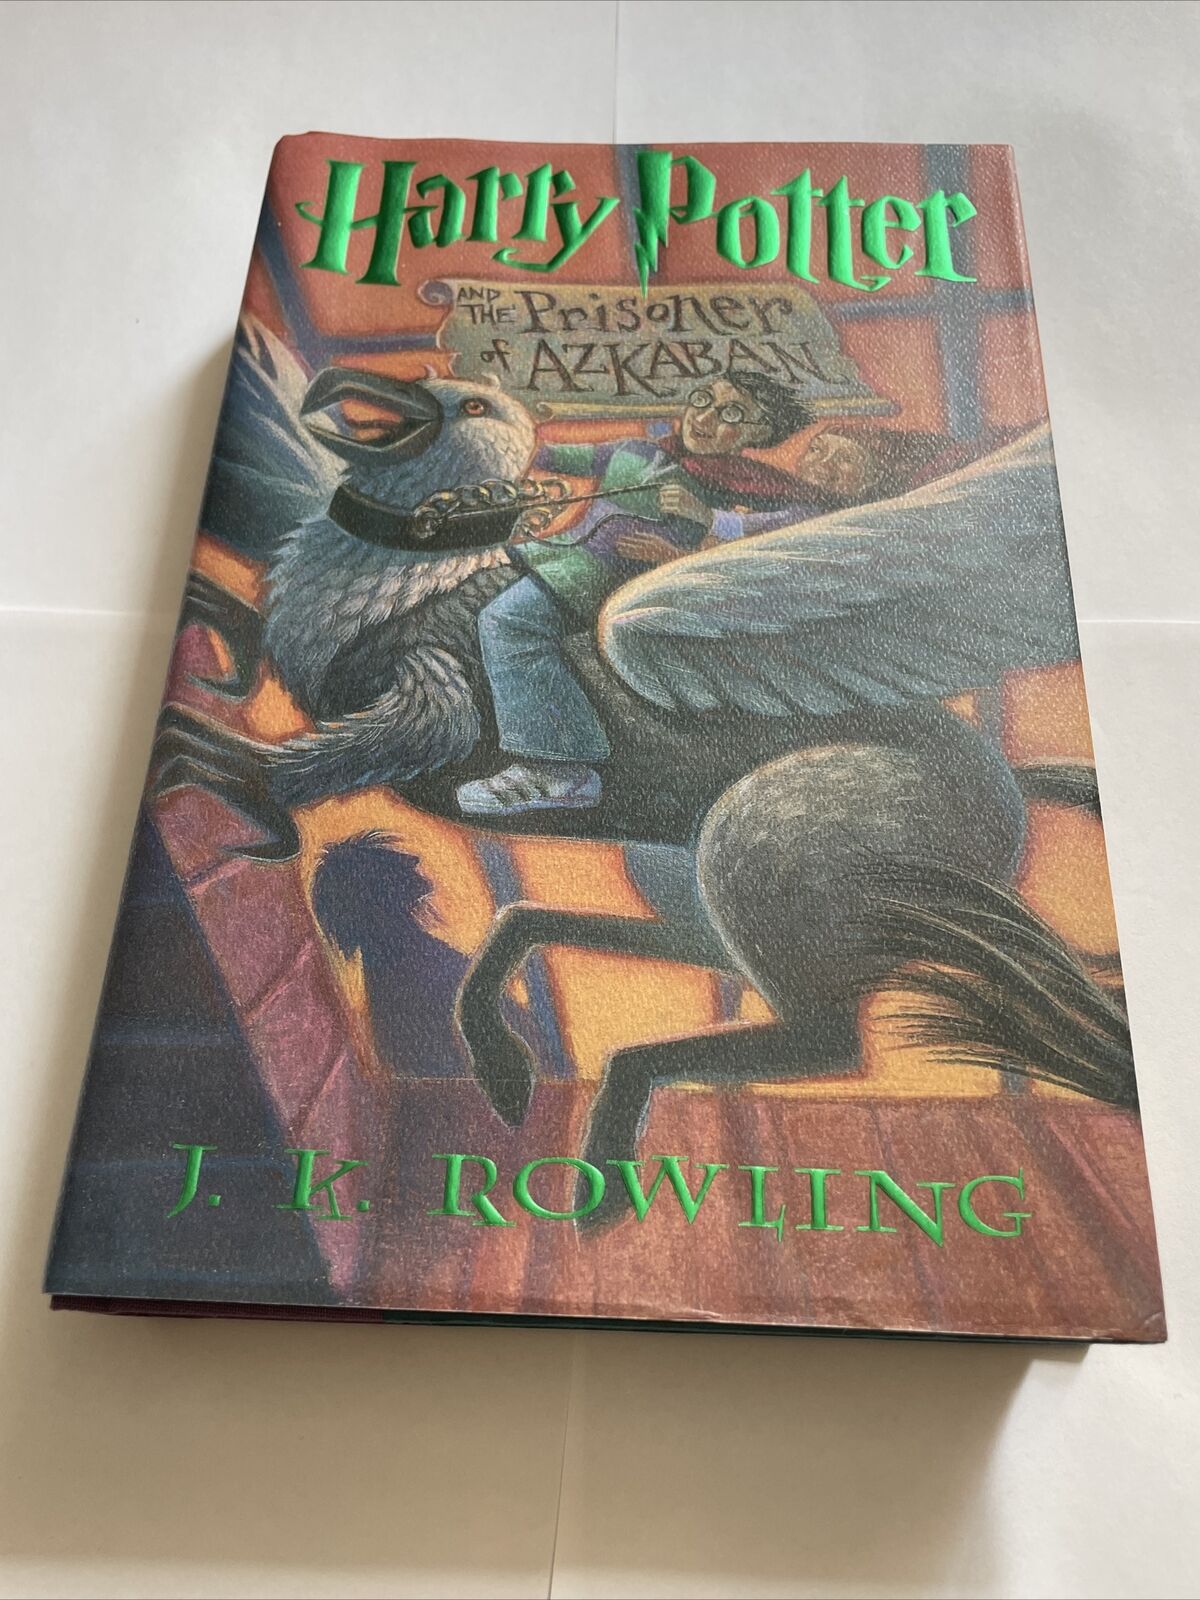 Harry Potter and the Prisoner of Azkaban, First American Edition 1999